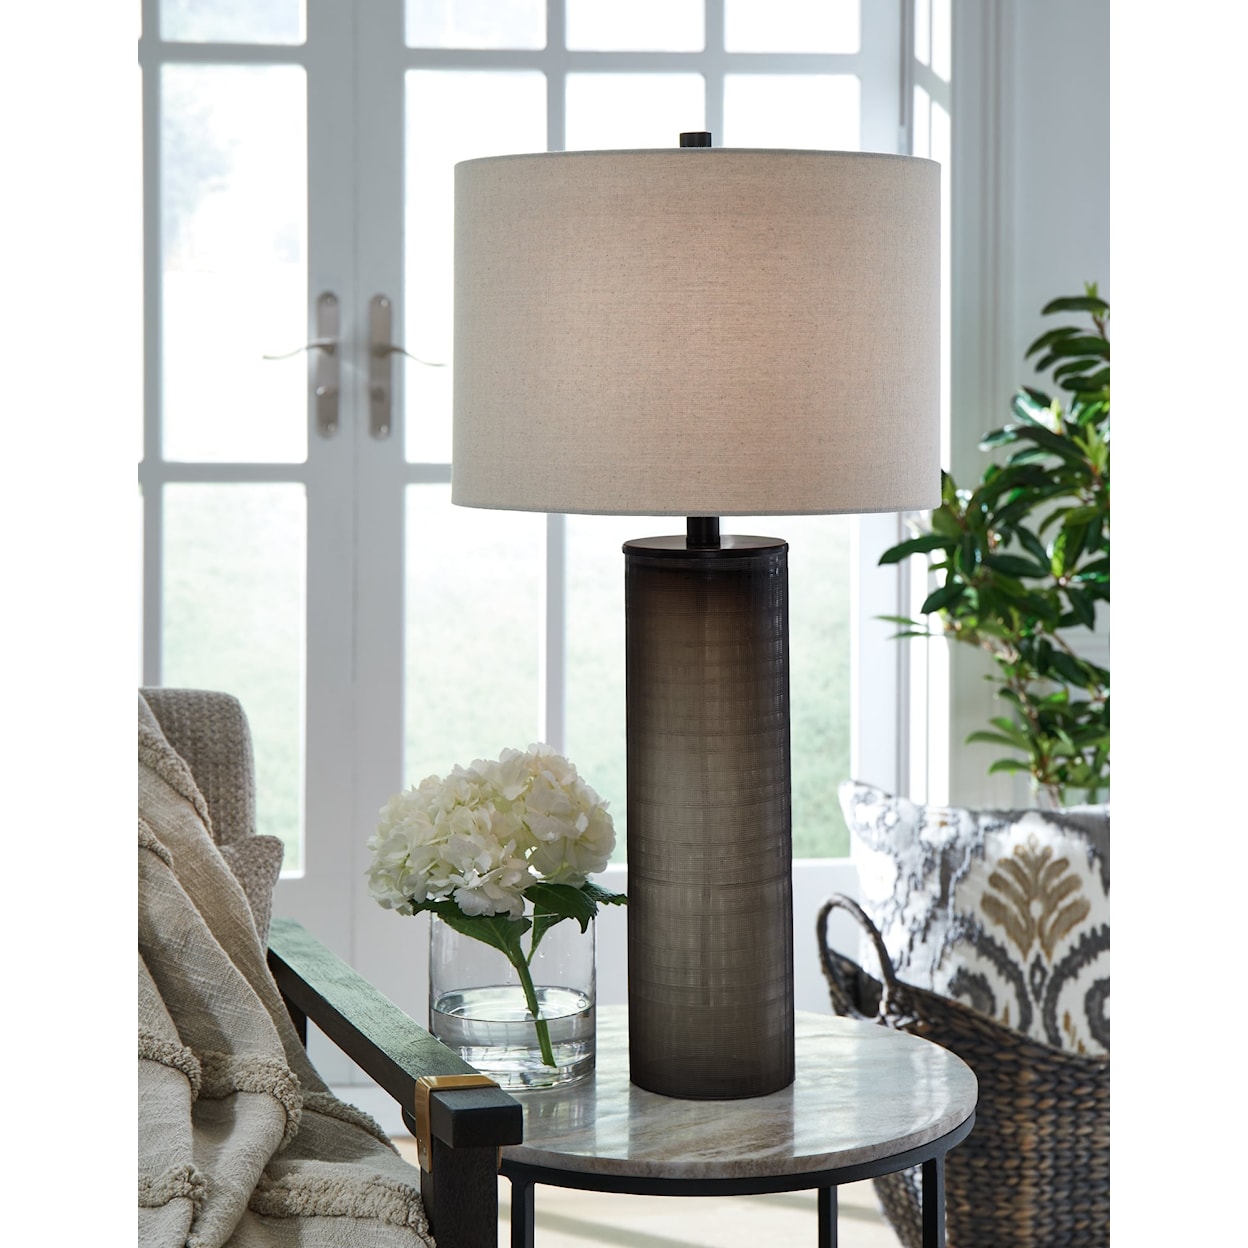 Signature Design by Ashley Dingerly Glass Table Lamp